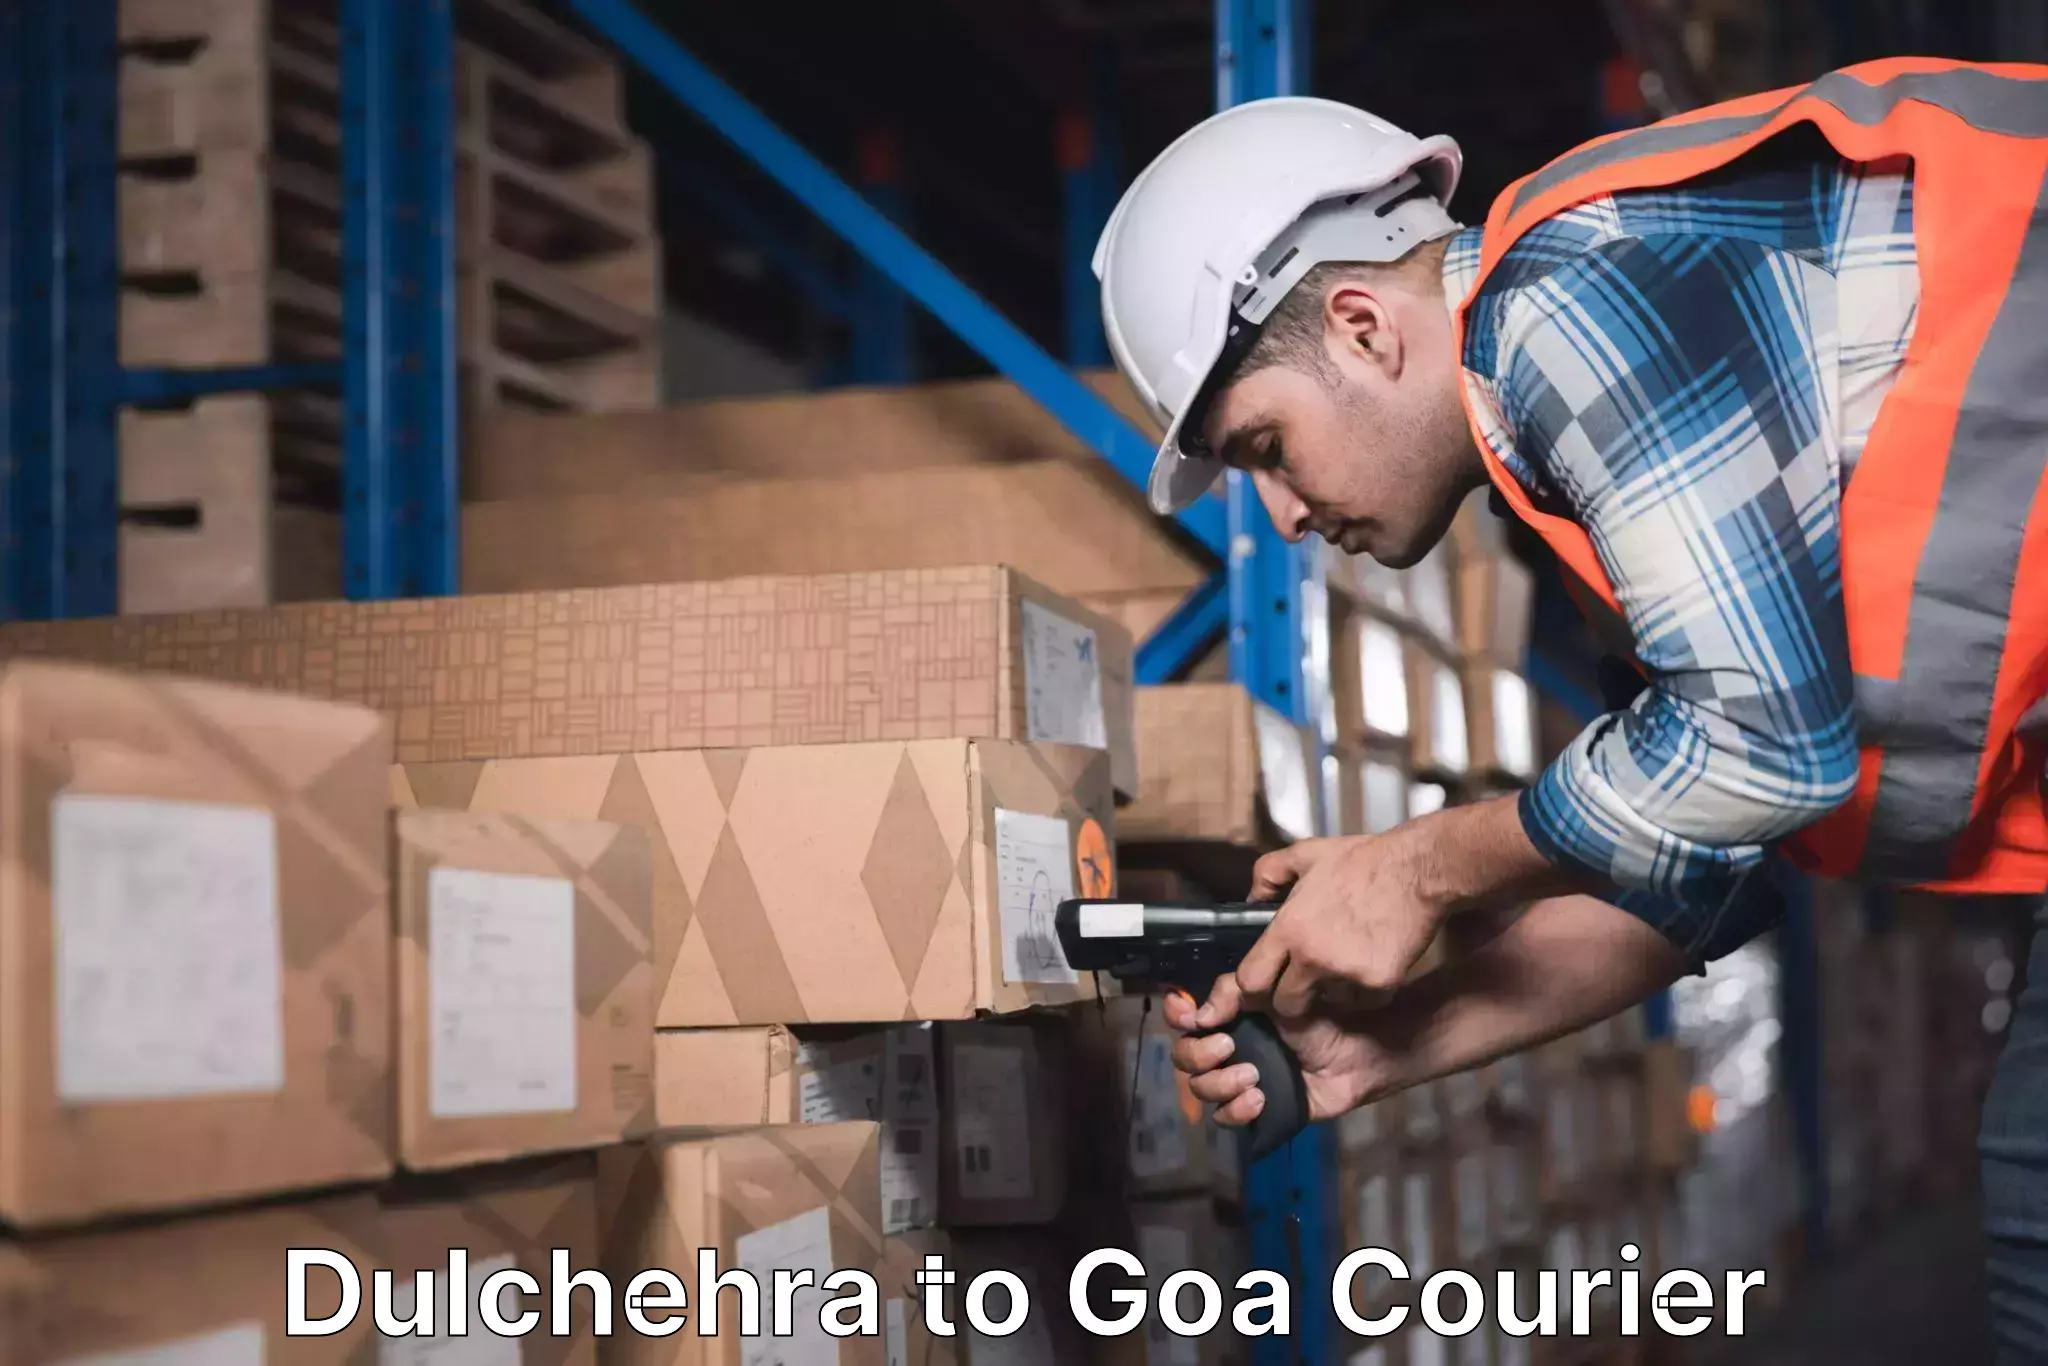 Easy access courier services Dulchehra to Goa